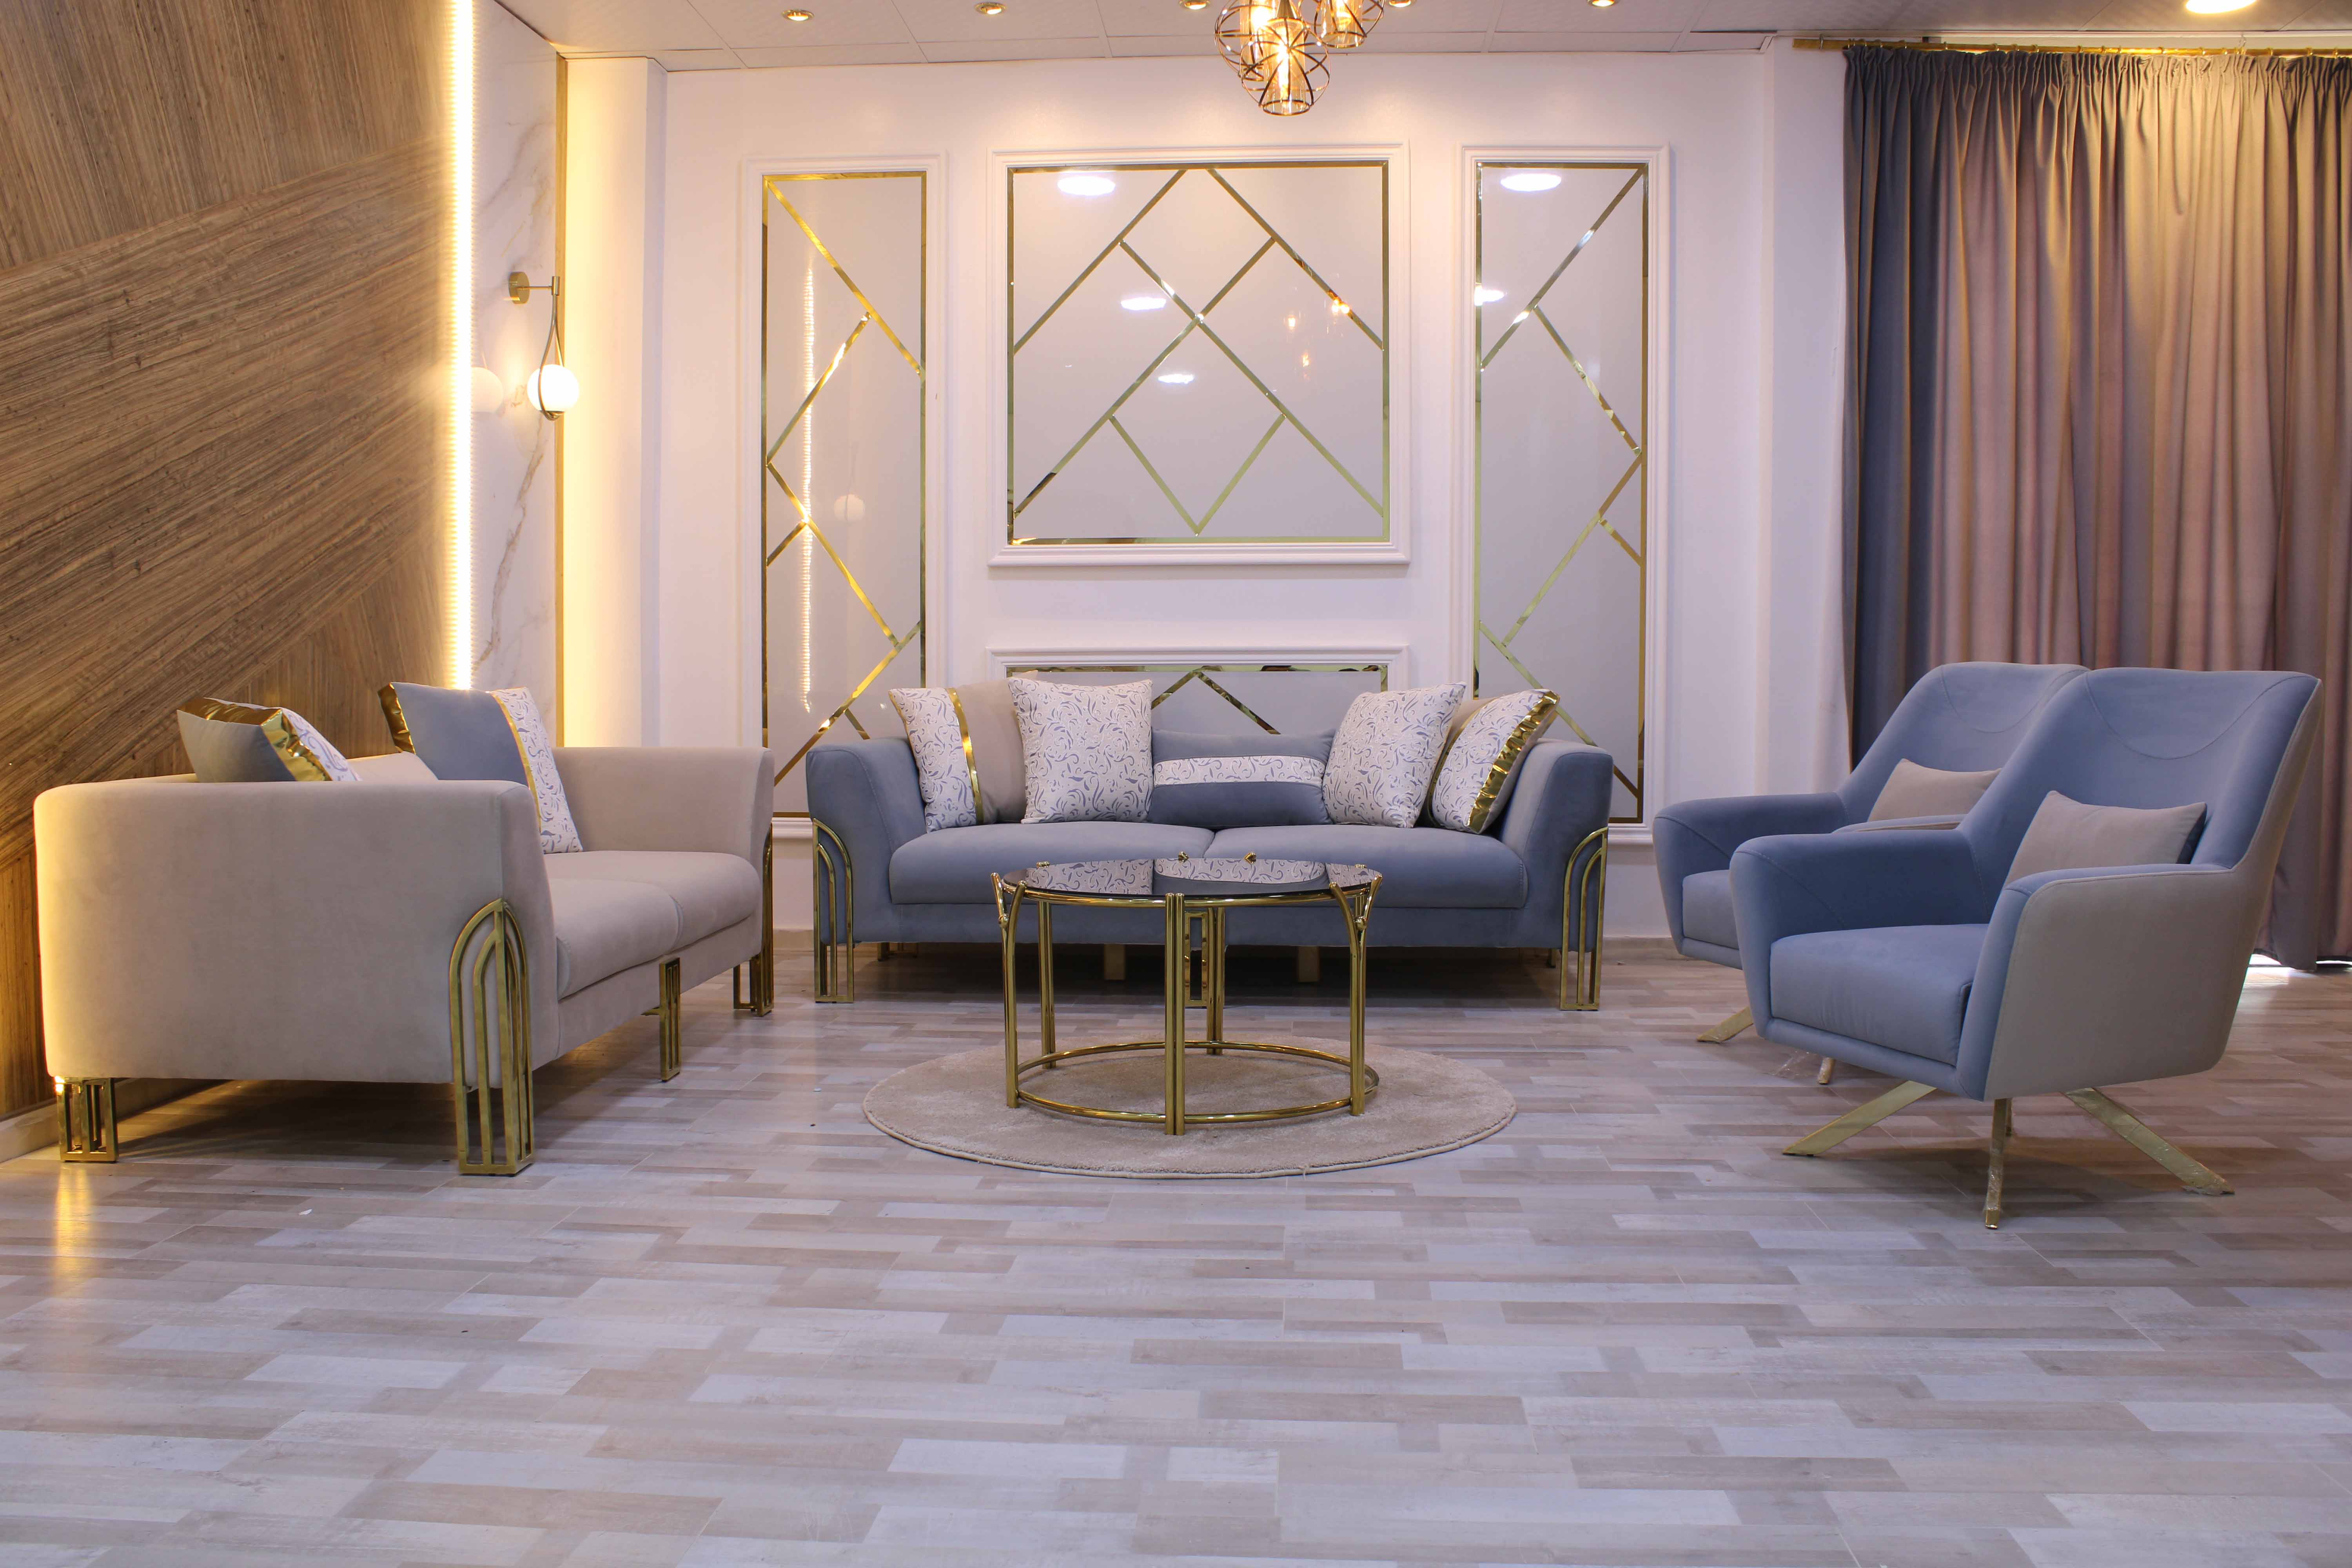 Babyblue, White, and Gold Cosmopolitan living room